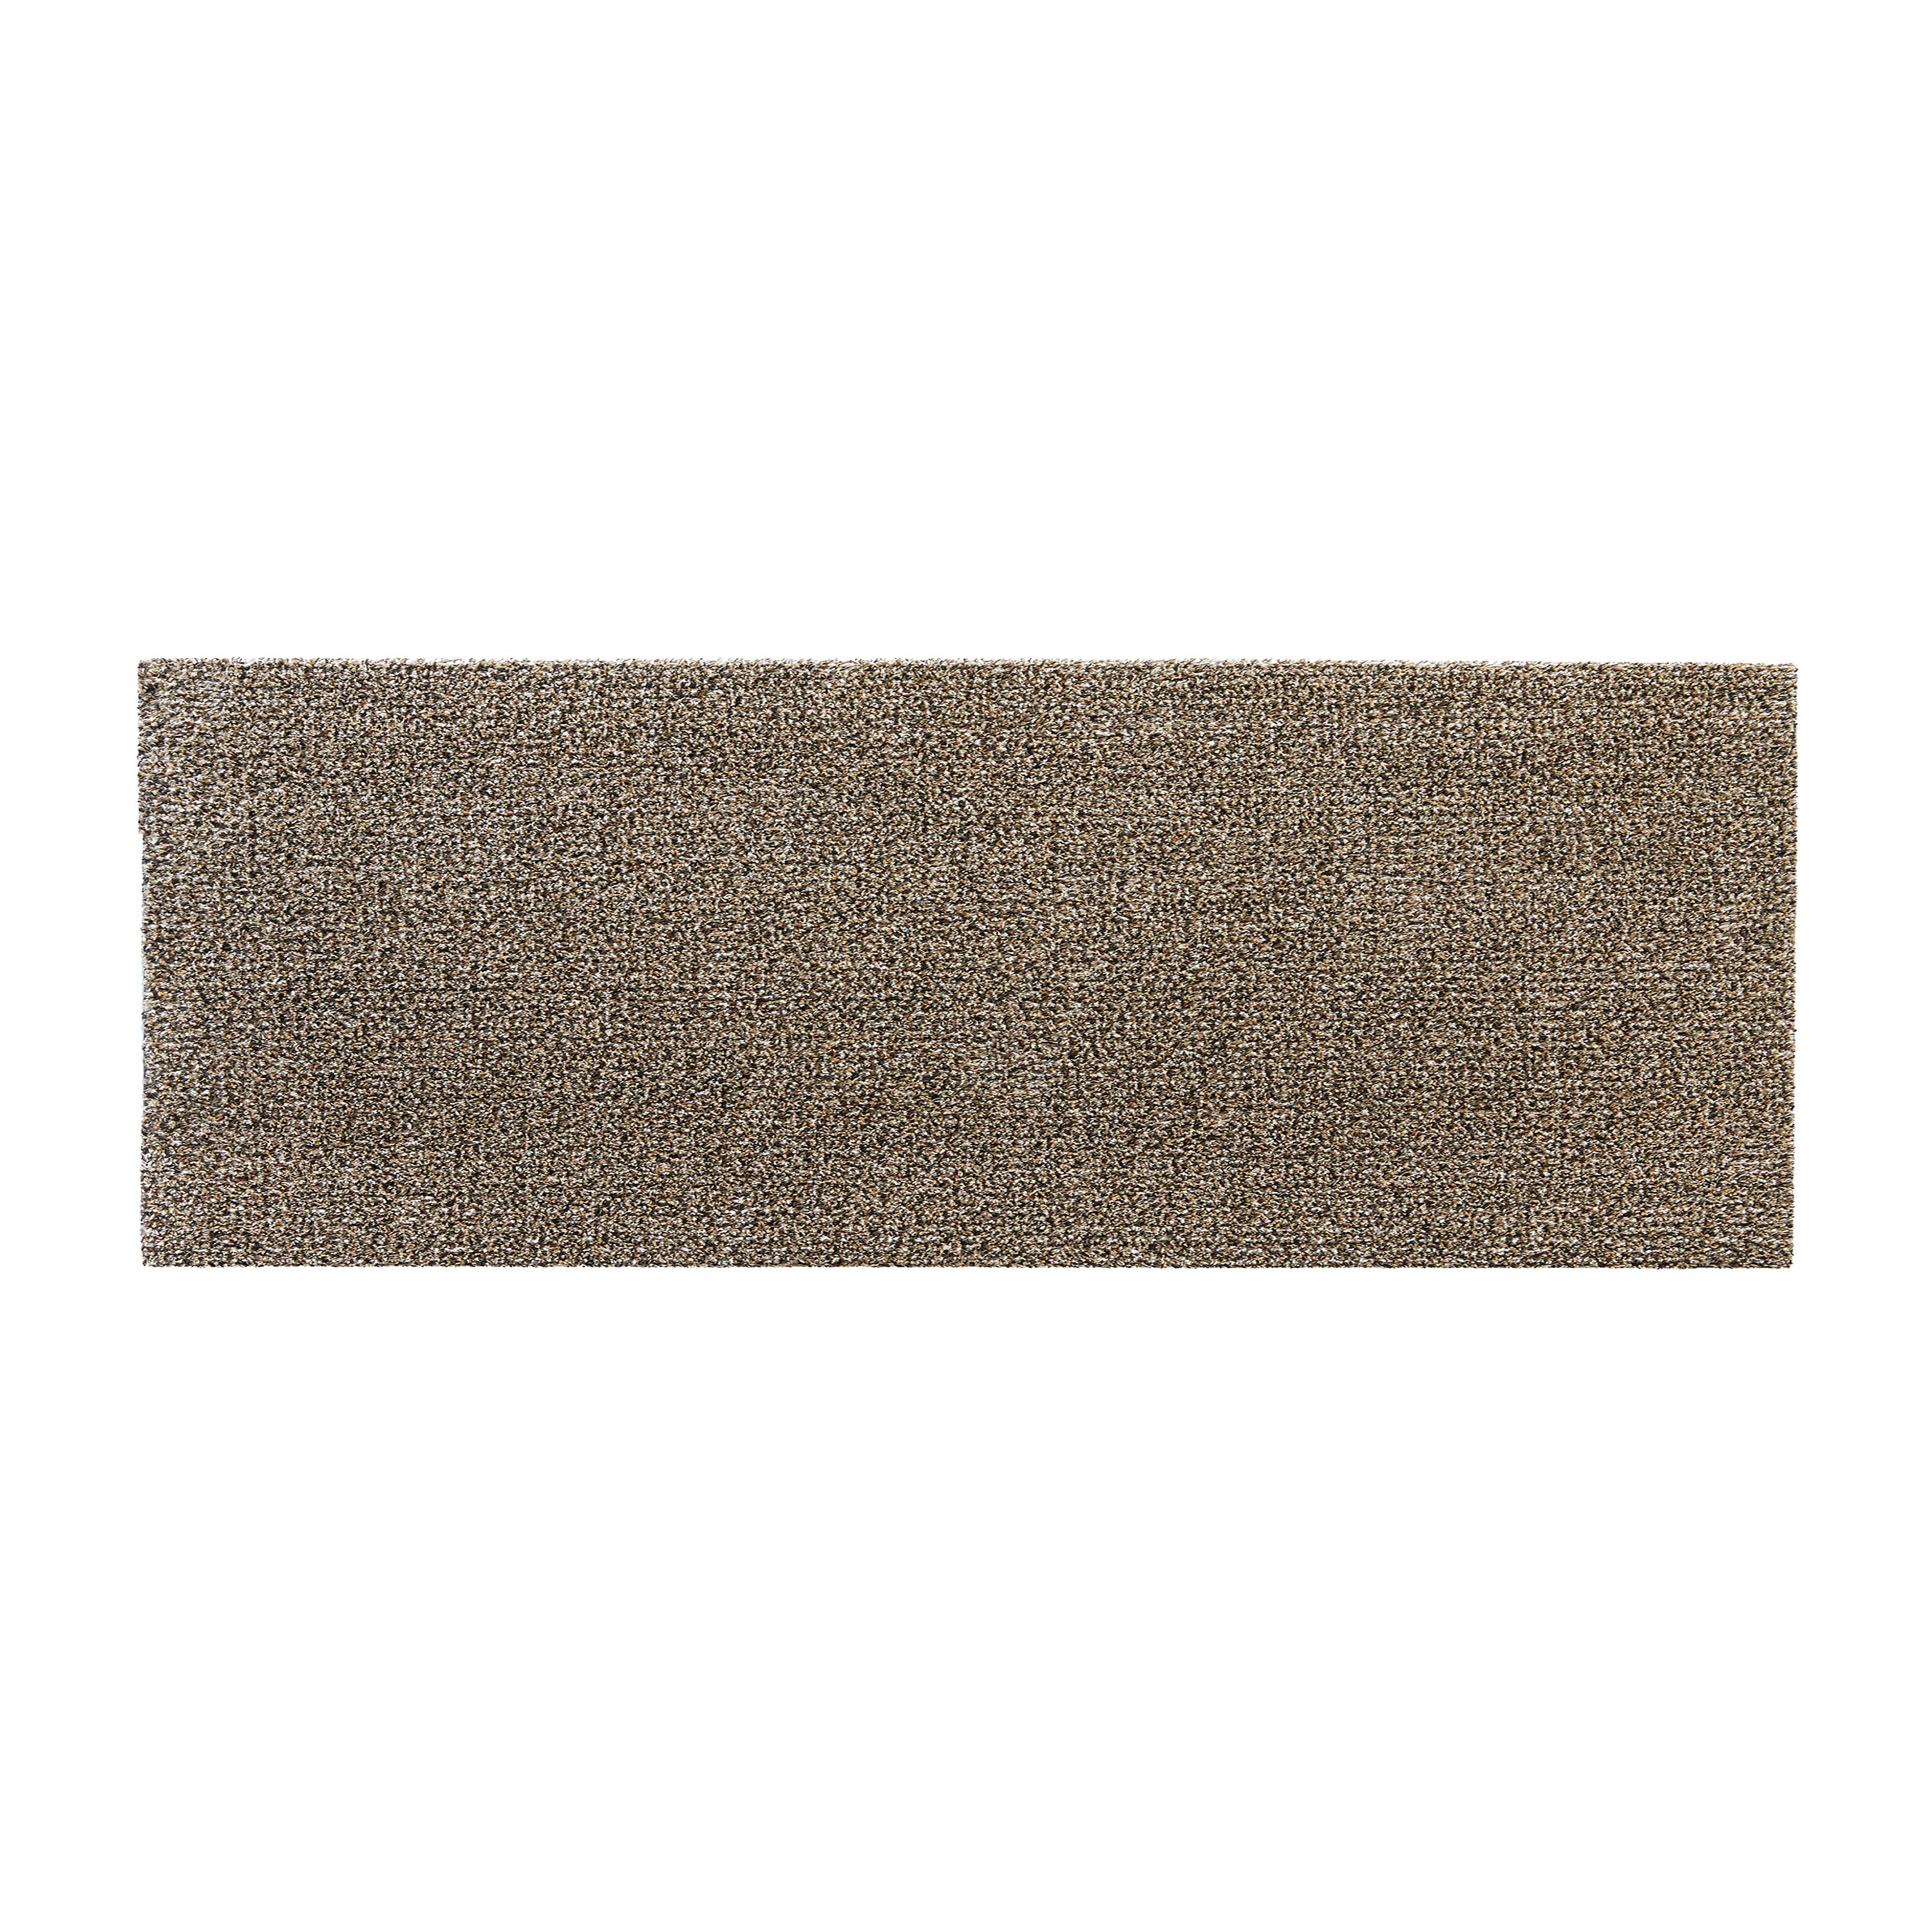 My Mat Dirt Trapping Mud Rug, 31" x 59"